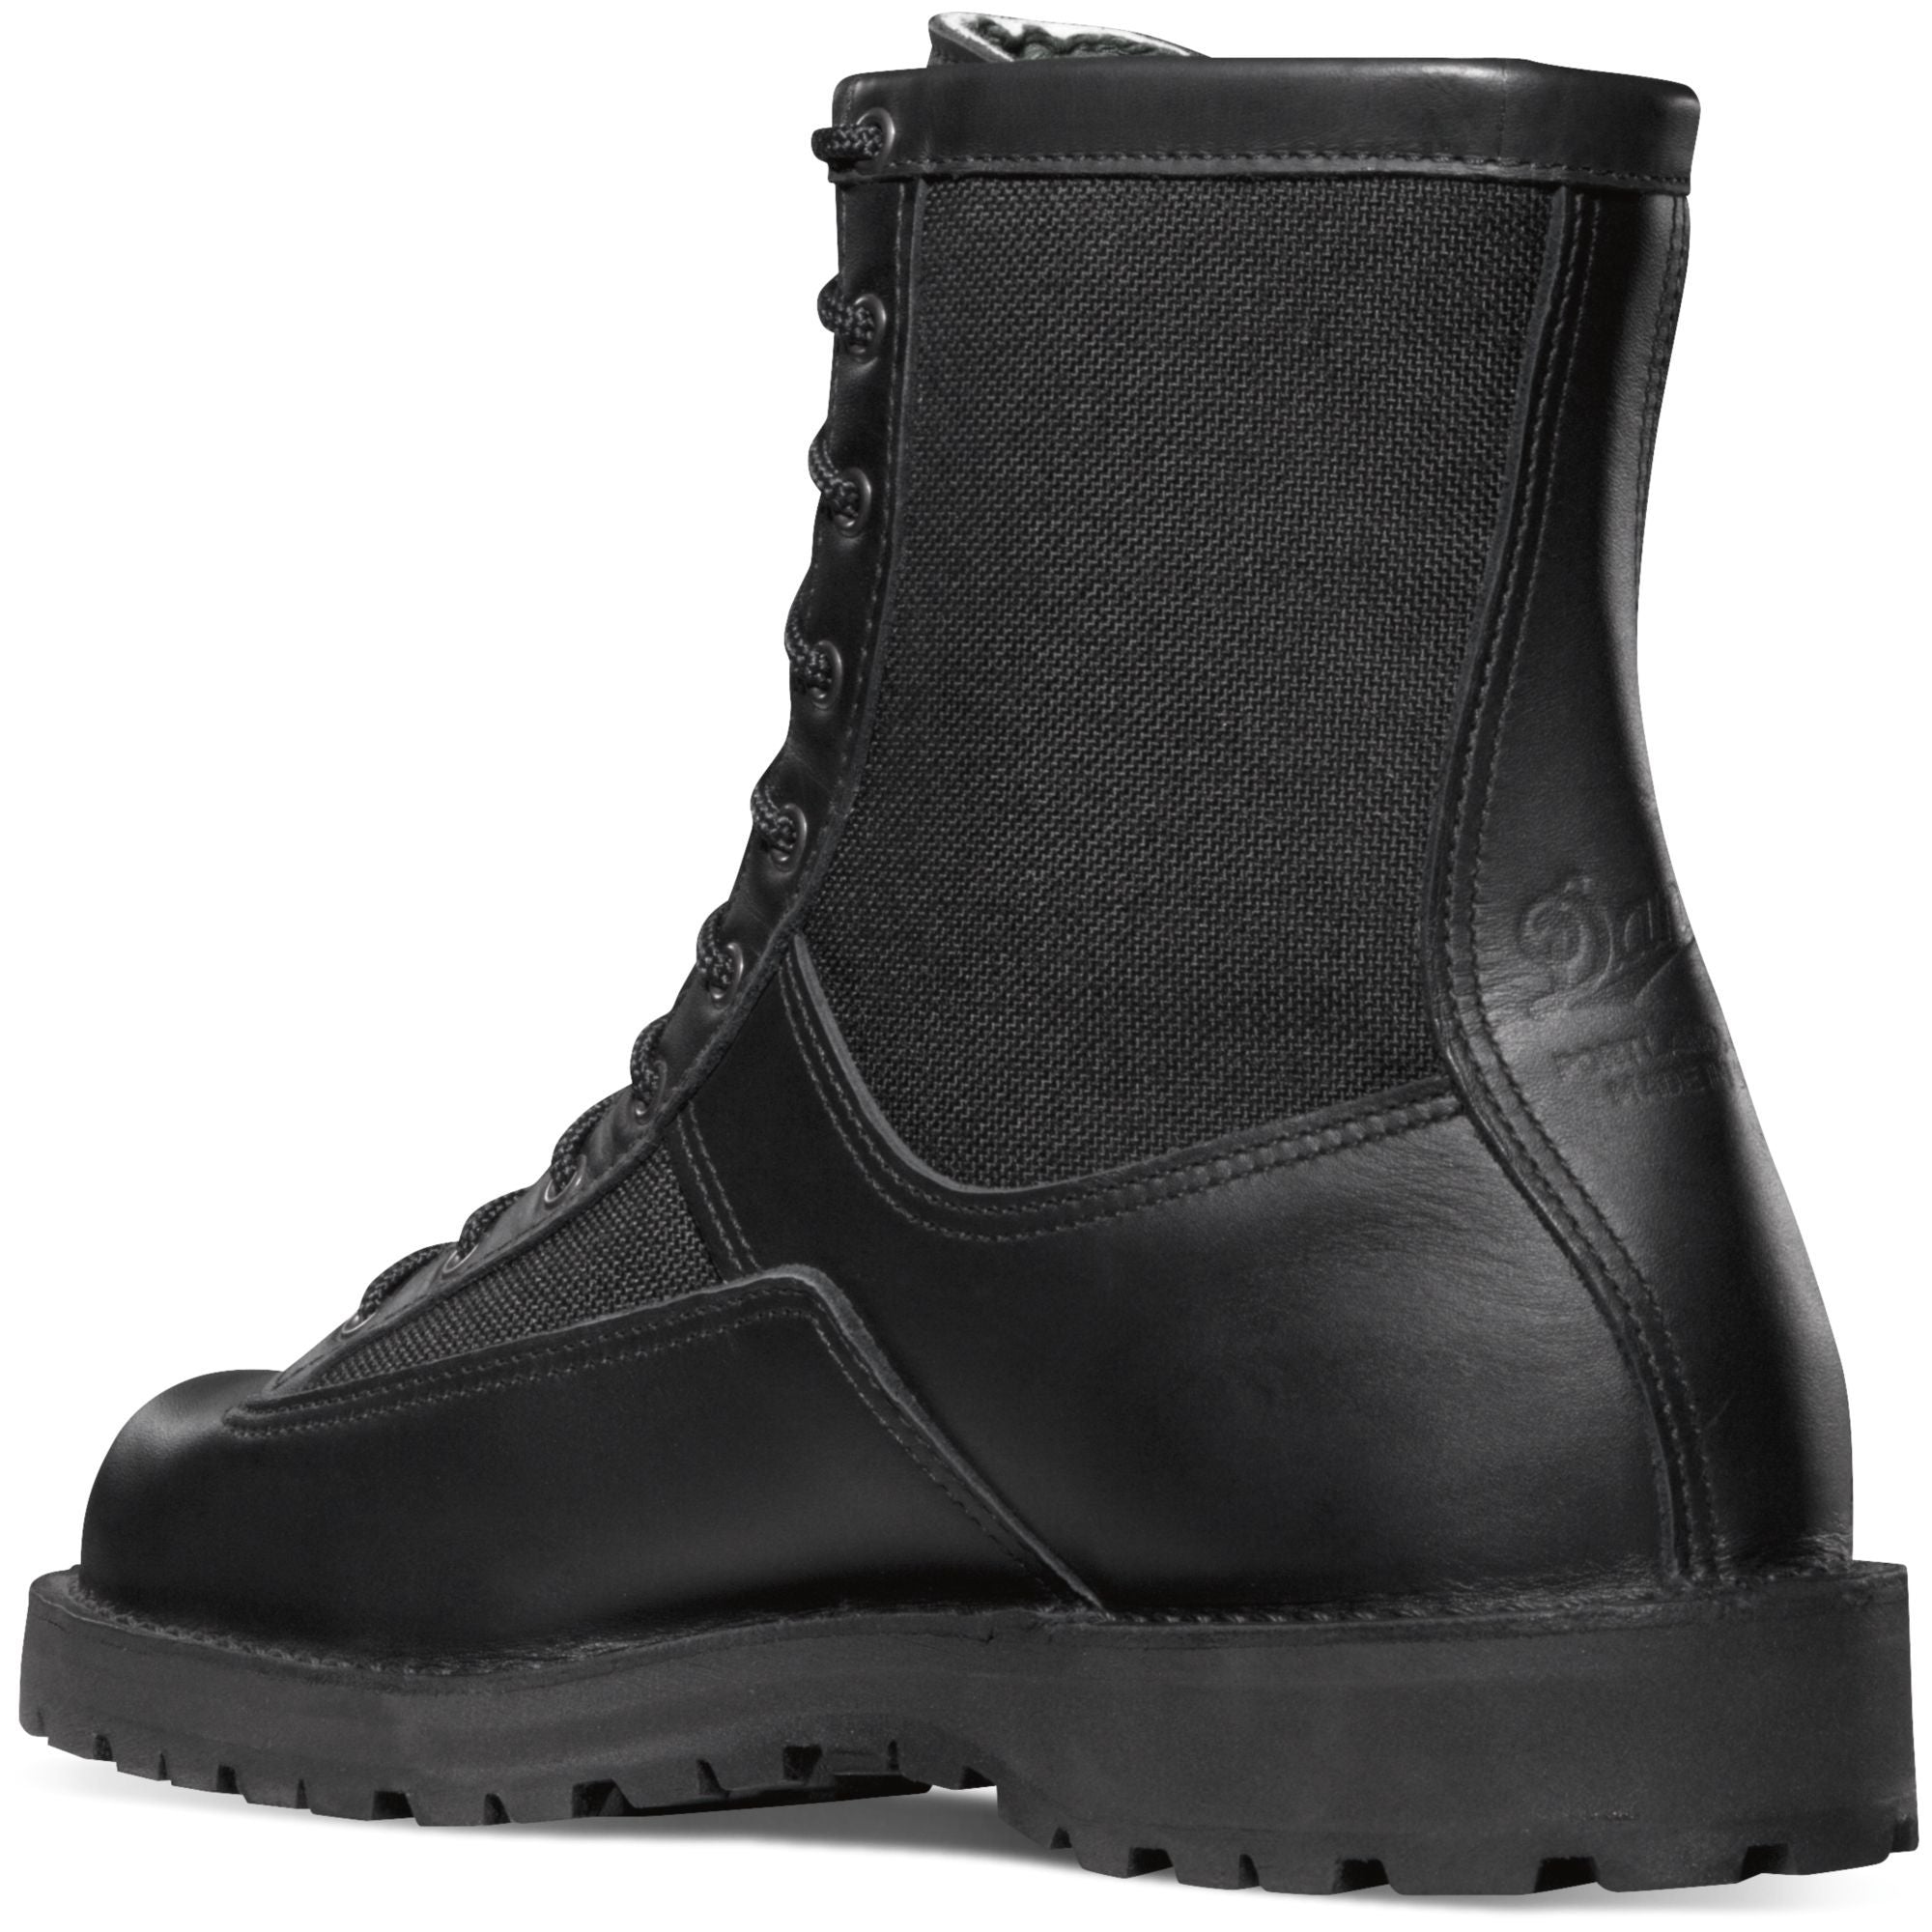 Danner Men's Acadia USA Made 8" Insulated WP Duty Boot - Black - 69210  - Overlook Boots